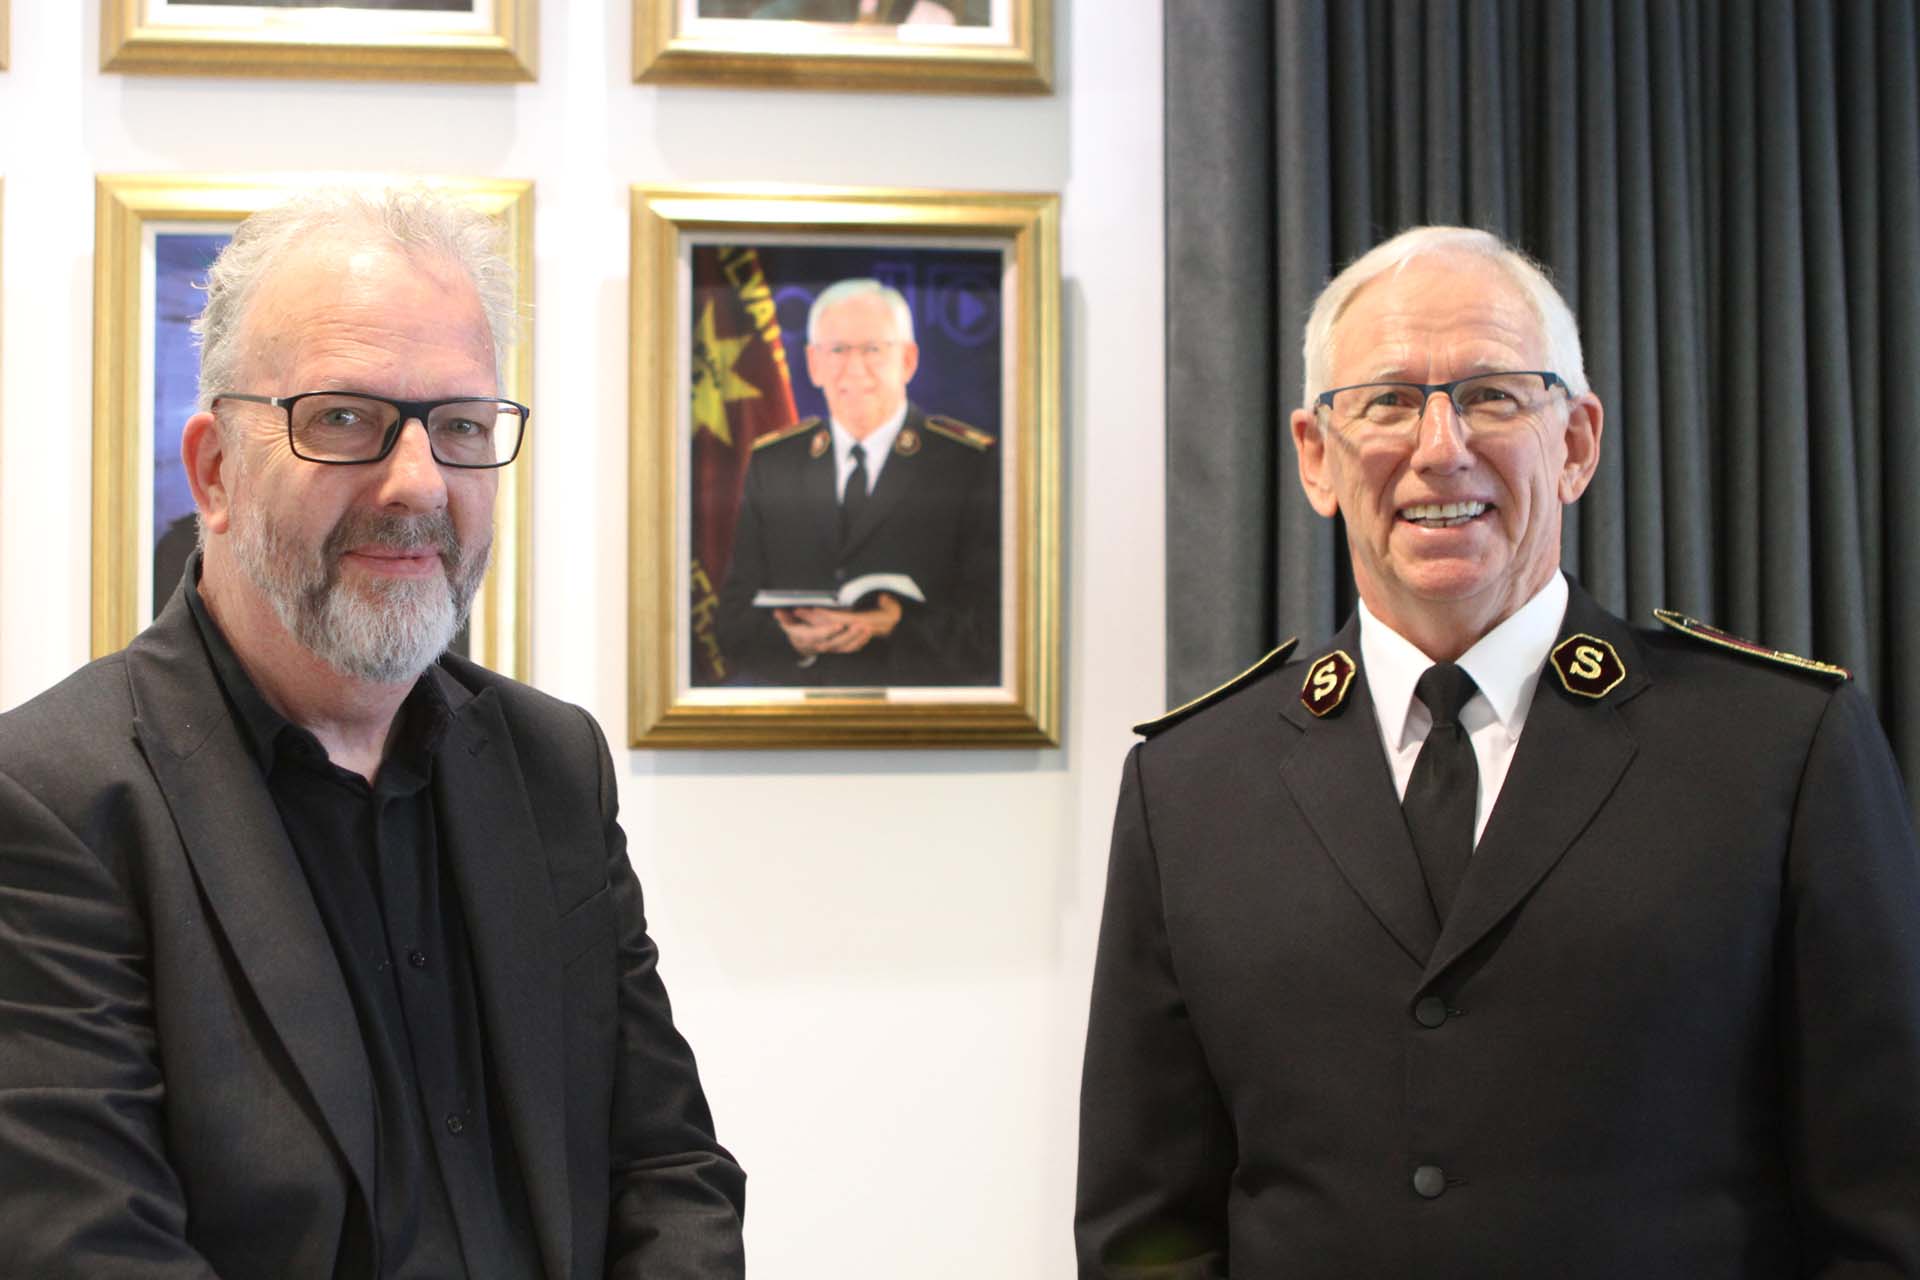 Andrew King Bromley Photographer with General Brian Peddle of the Salvation Army